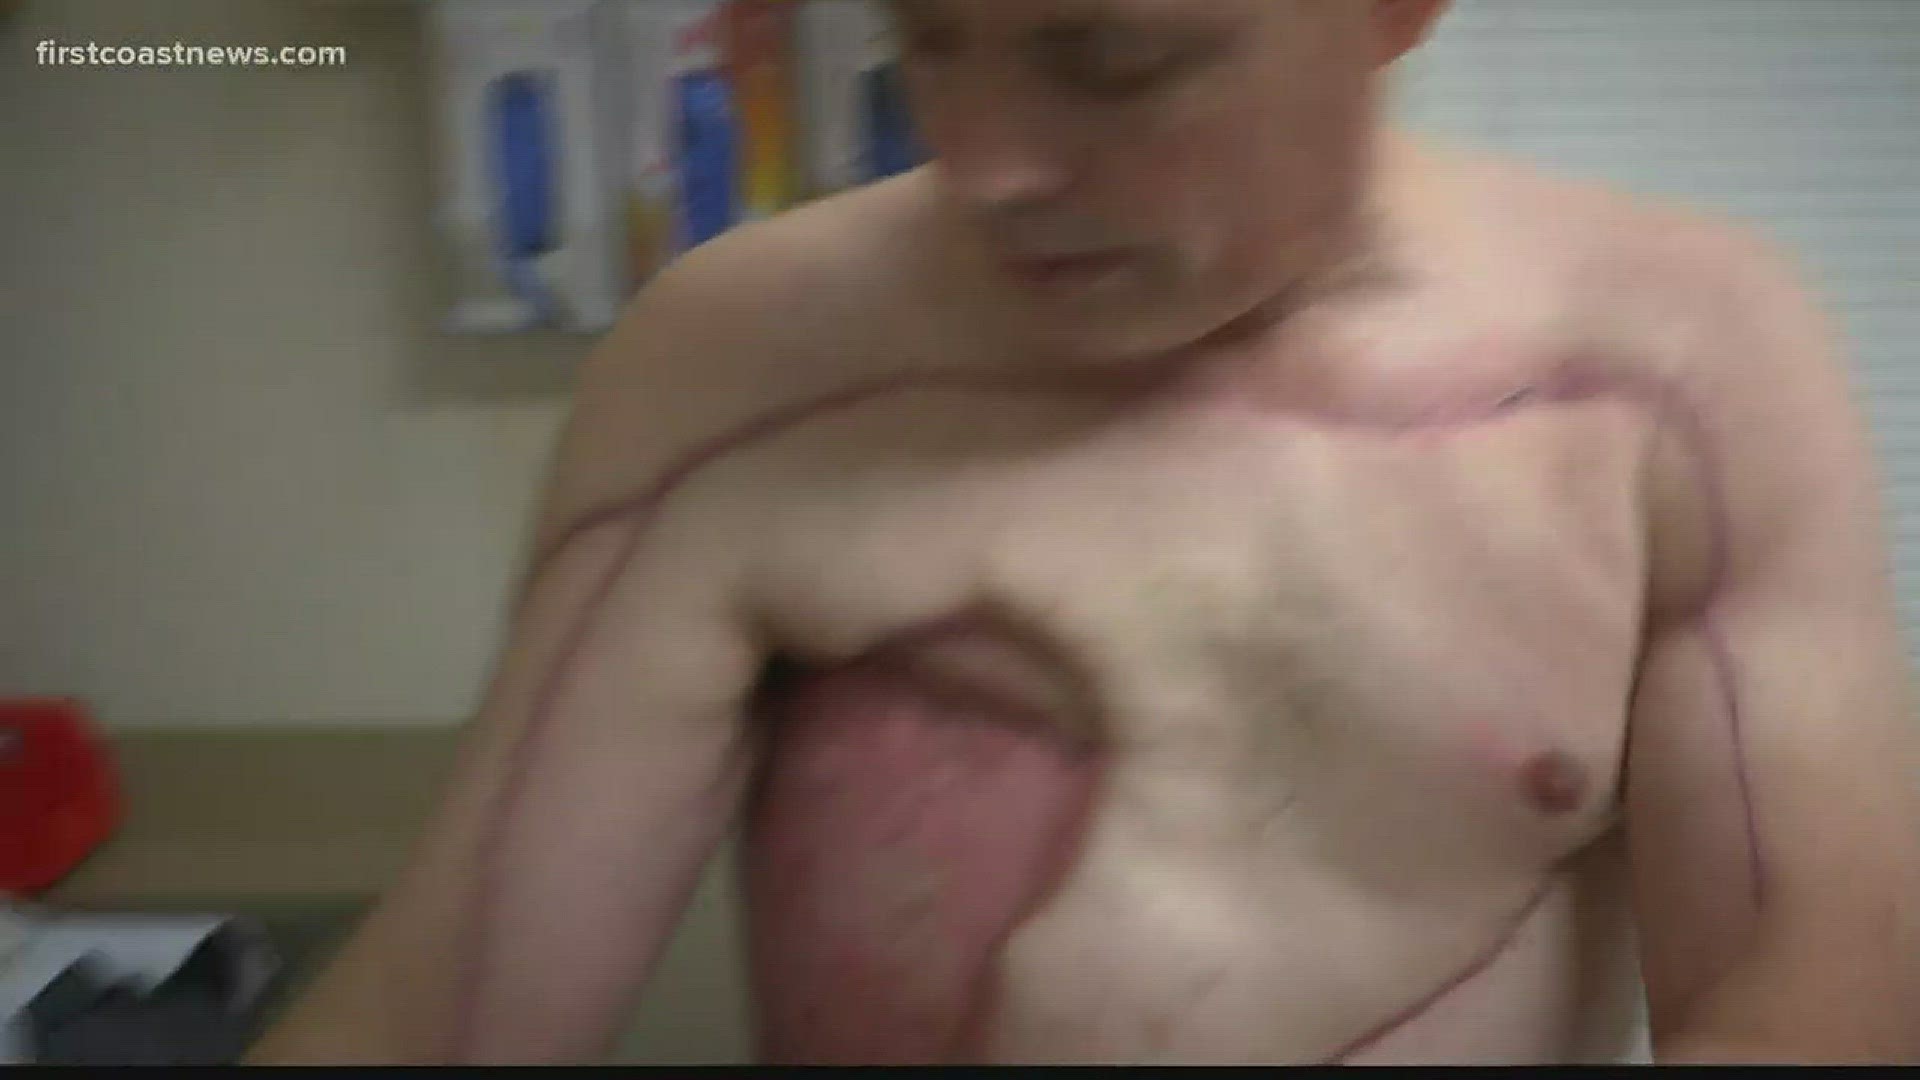 What started out as pain in his shoulder and pectoral muscle turned into a near-fatal infection of flesh-eating bacteria.